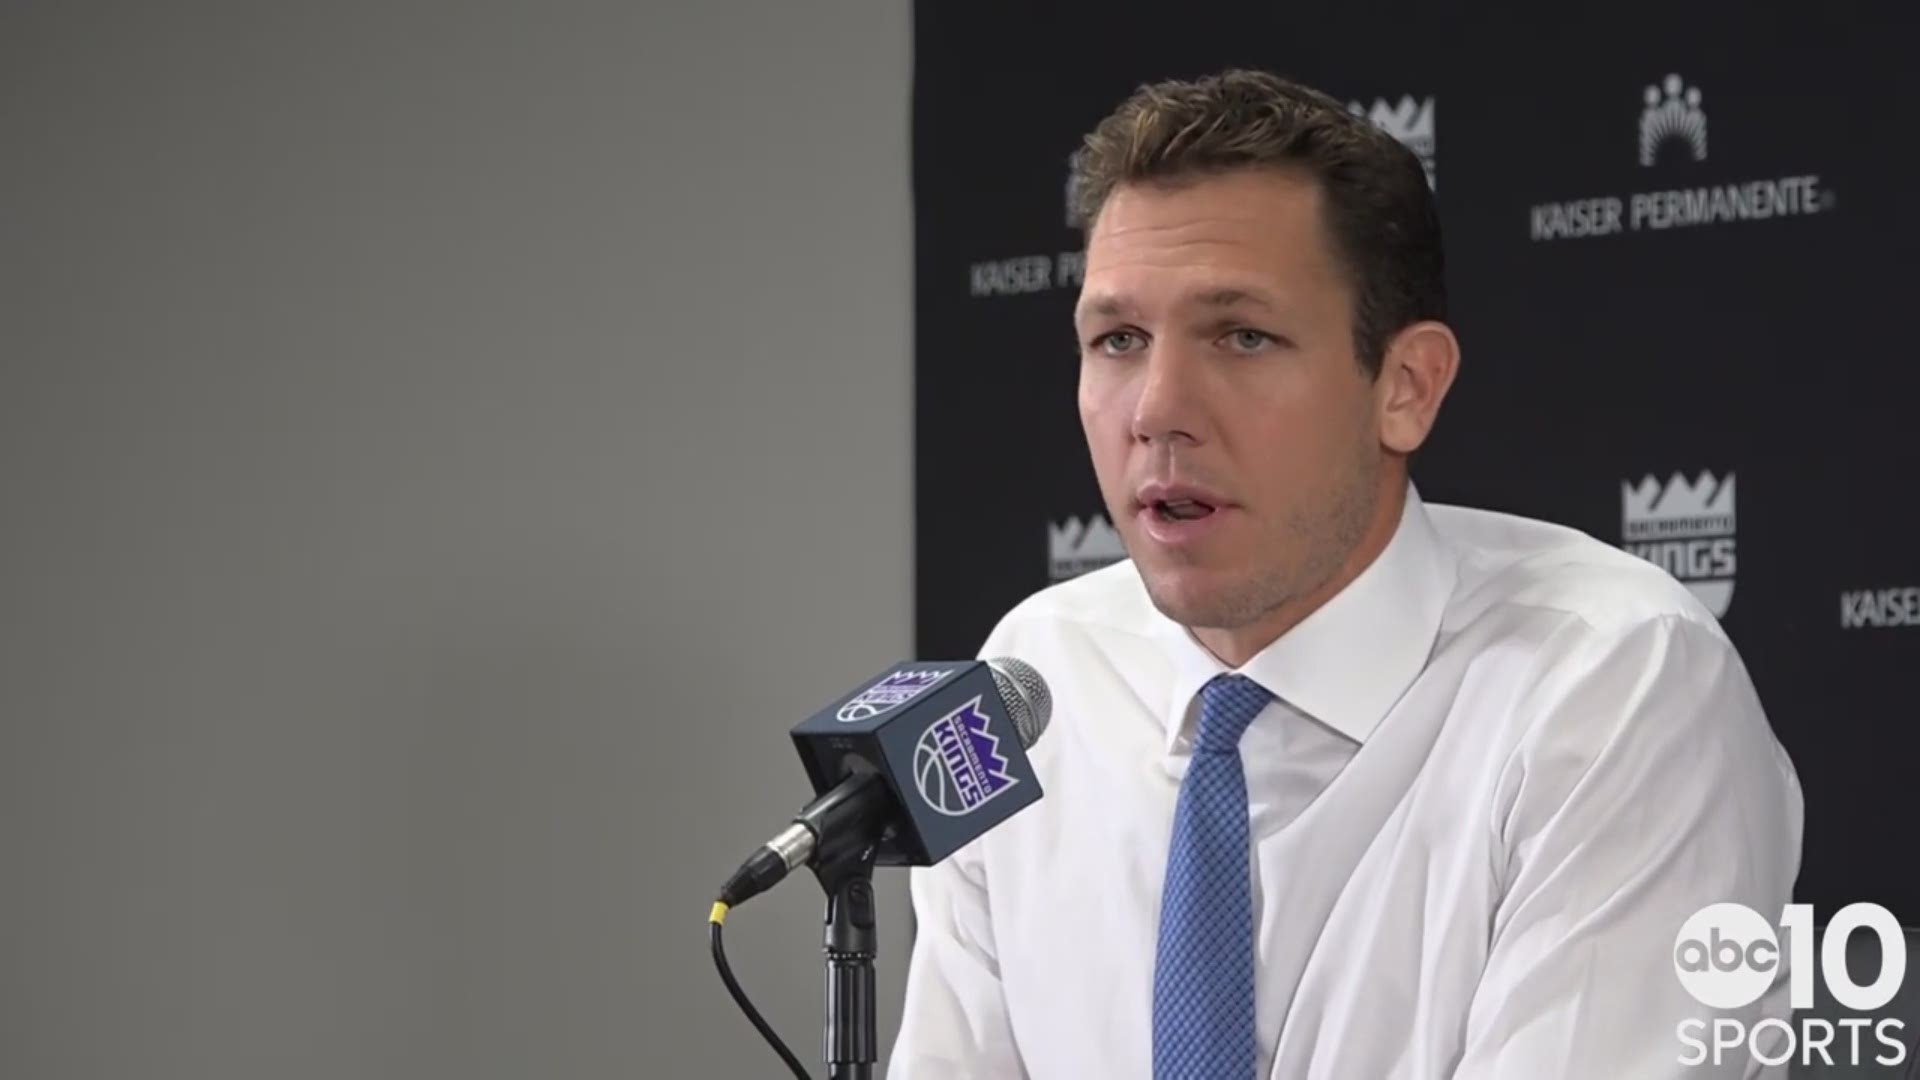 Following Wednesday's preseason finale, a victory over Melbourne United, Kings coach Luke Walton talks about the improvements needed before they open the NBA season.